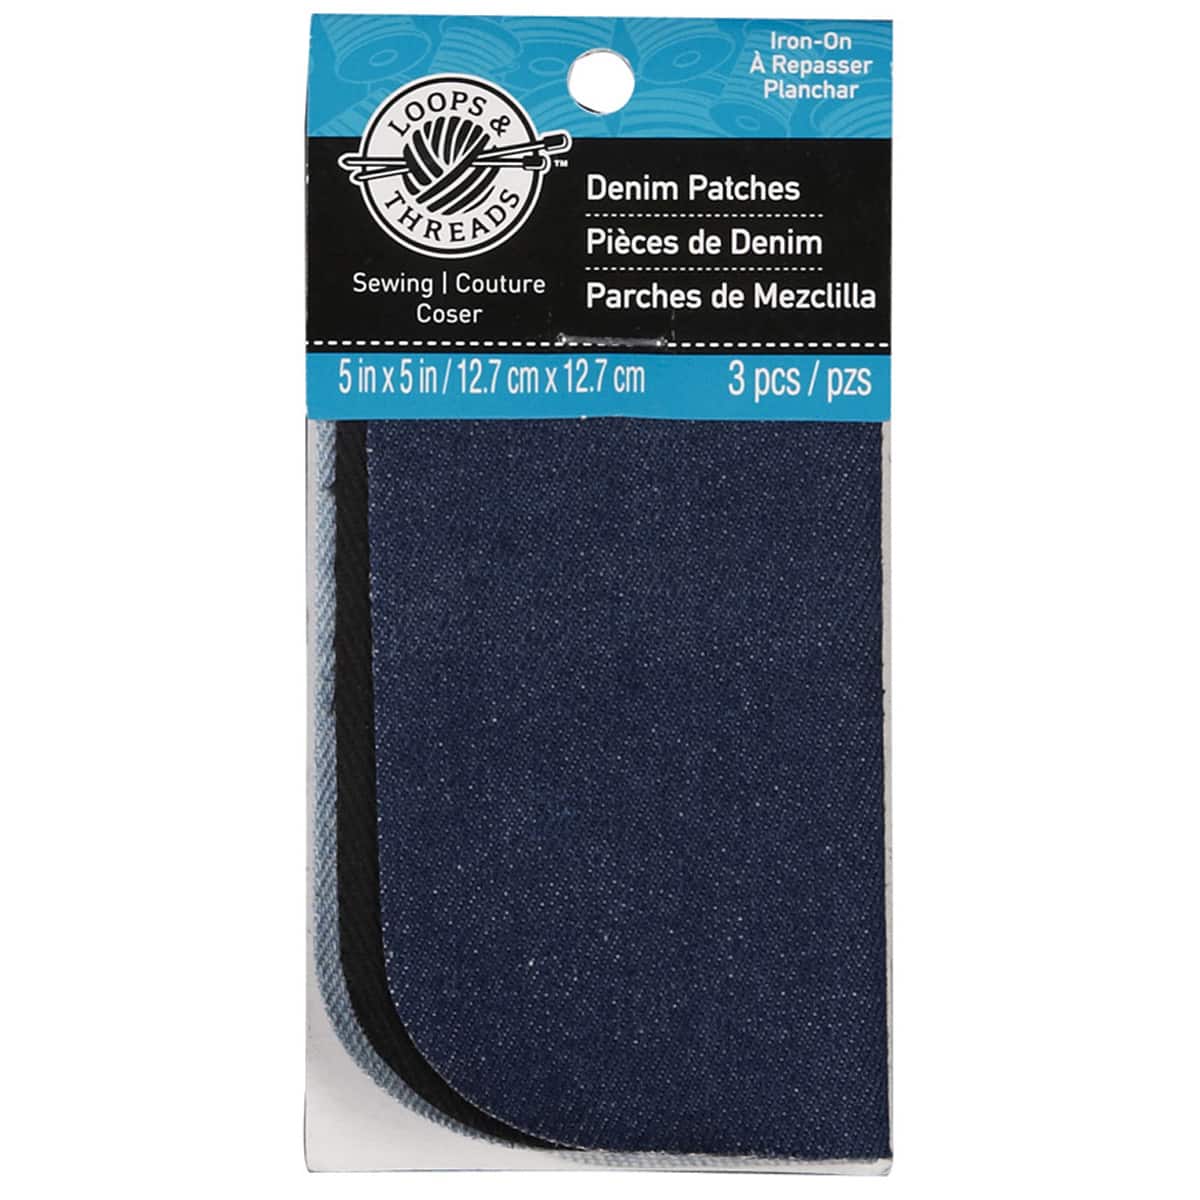 Two jeans repair patches  Iron on dark blue jeans patch - Studio